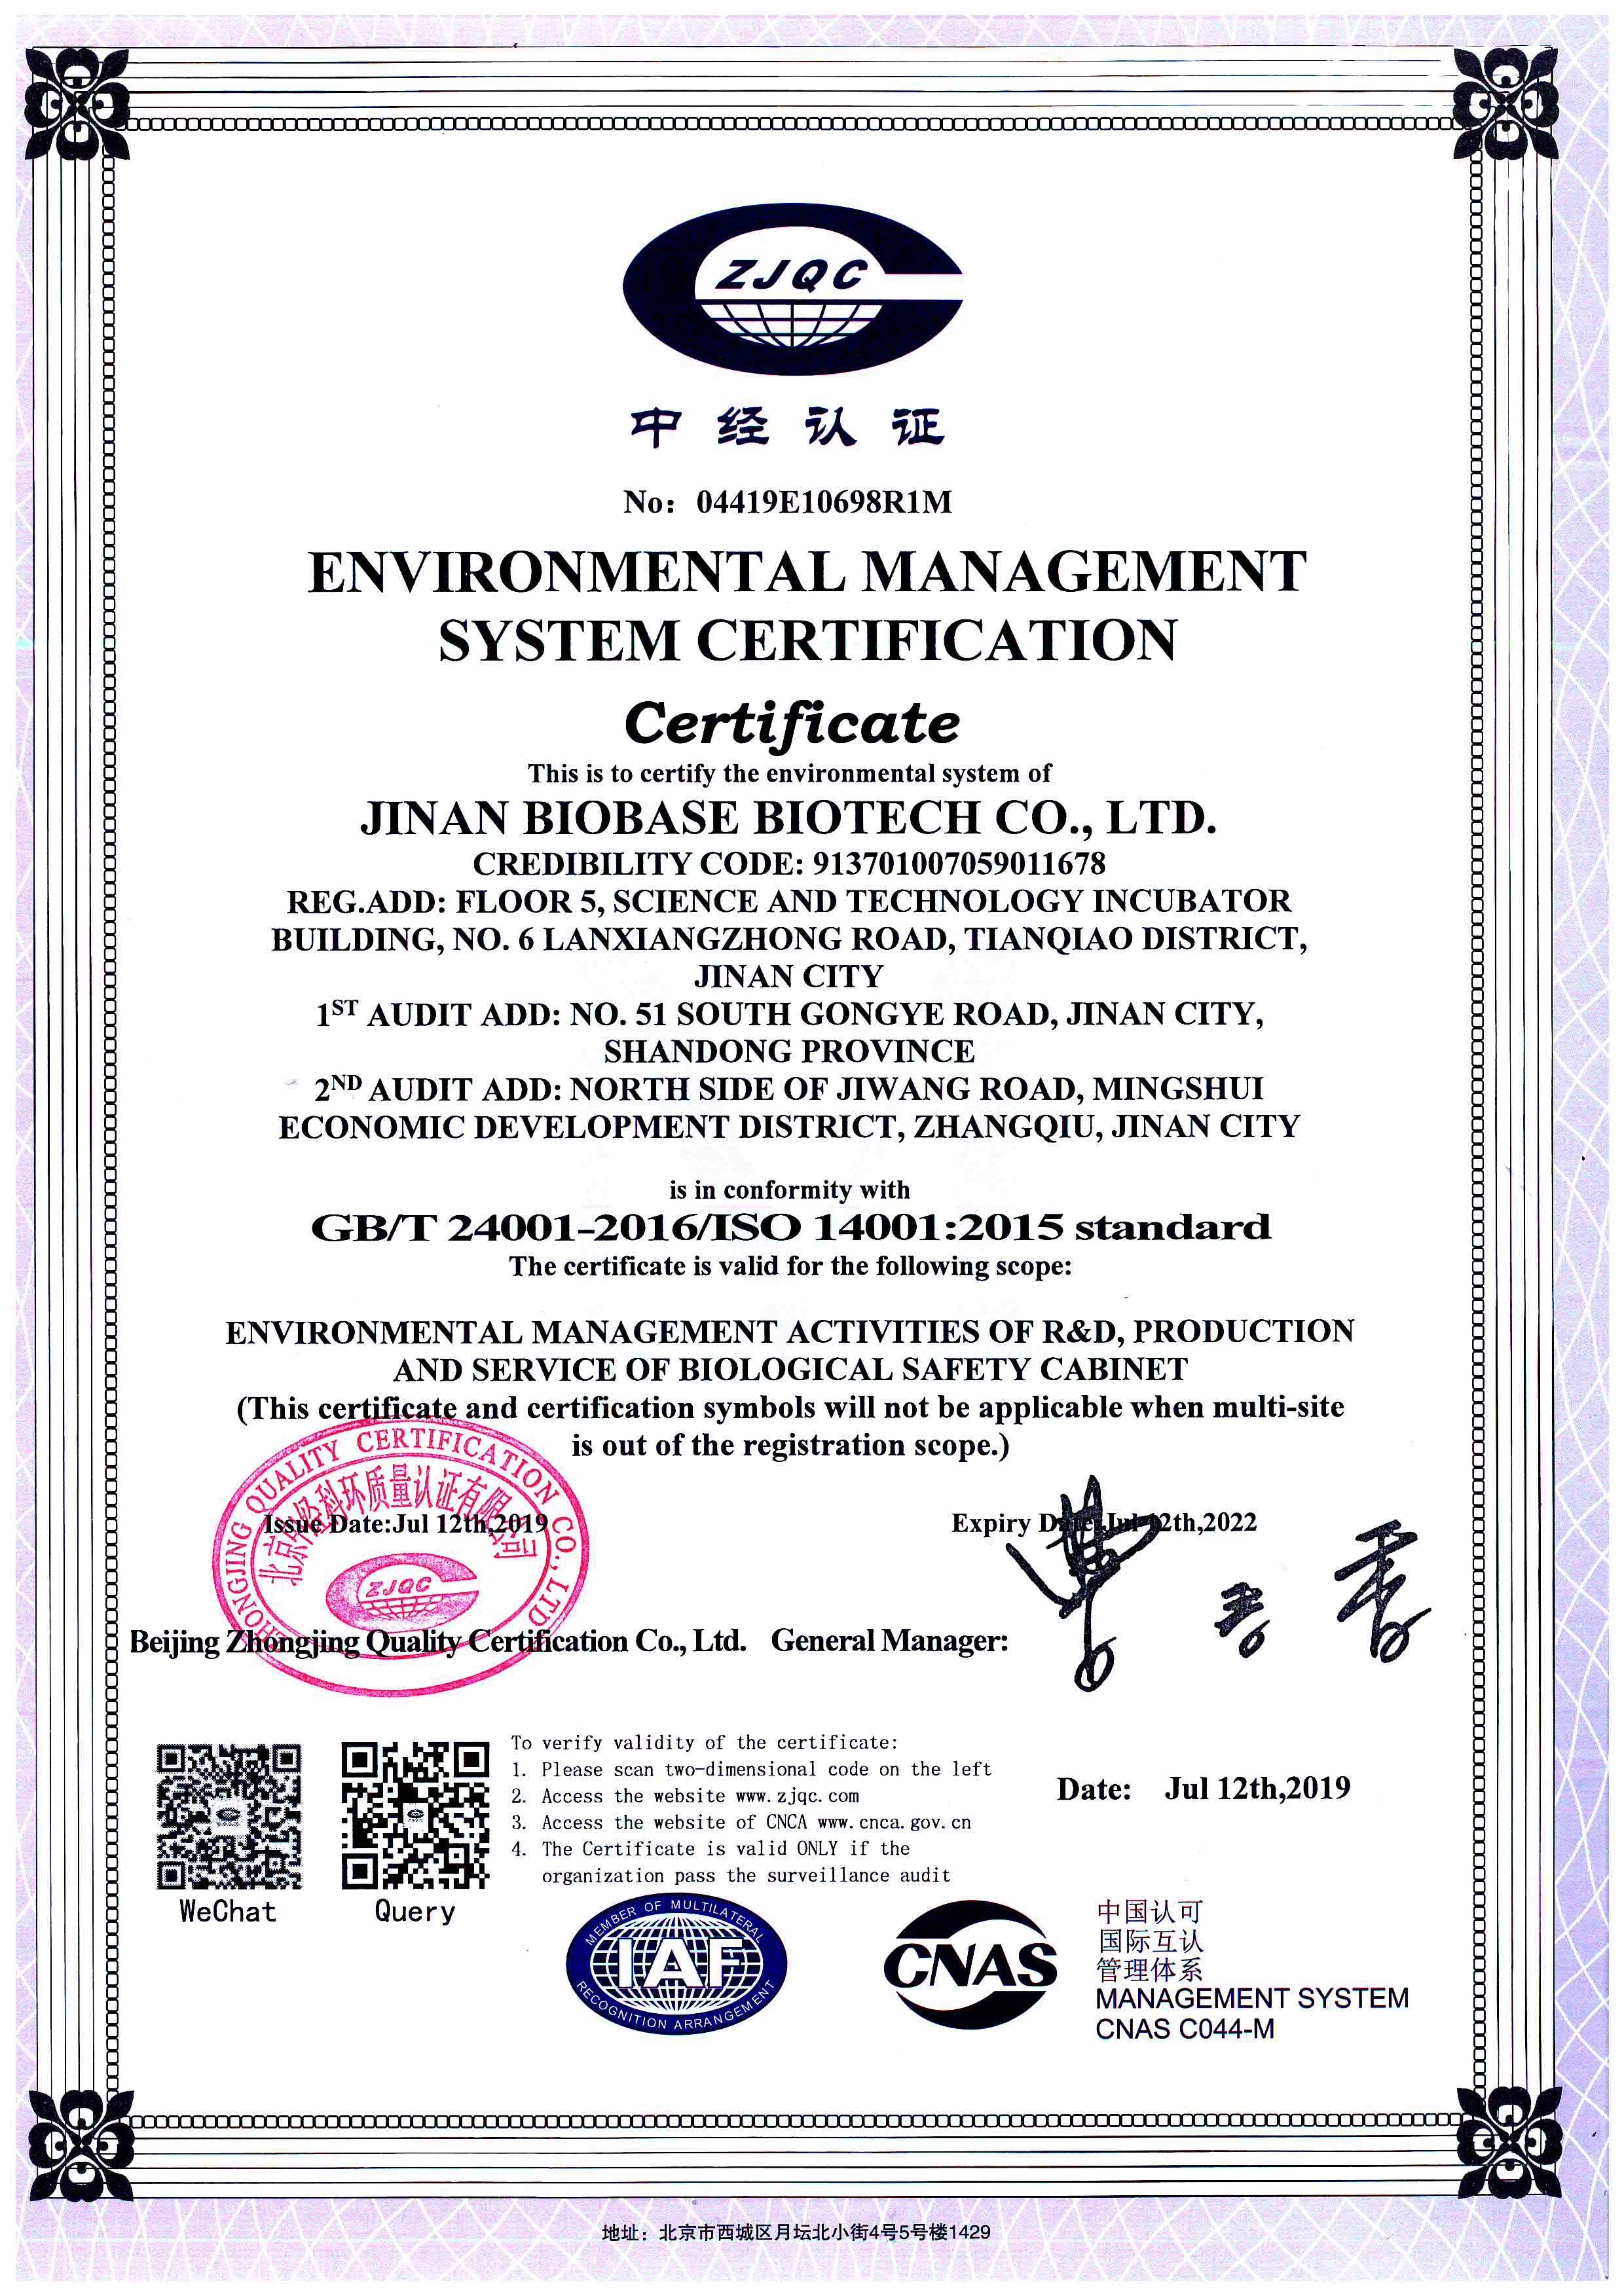 ISO14001 Featured Image